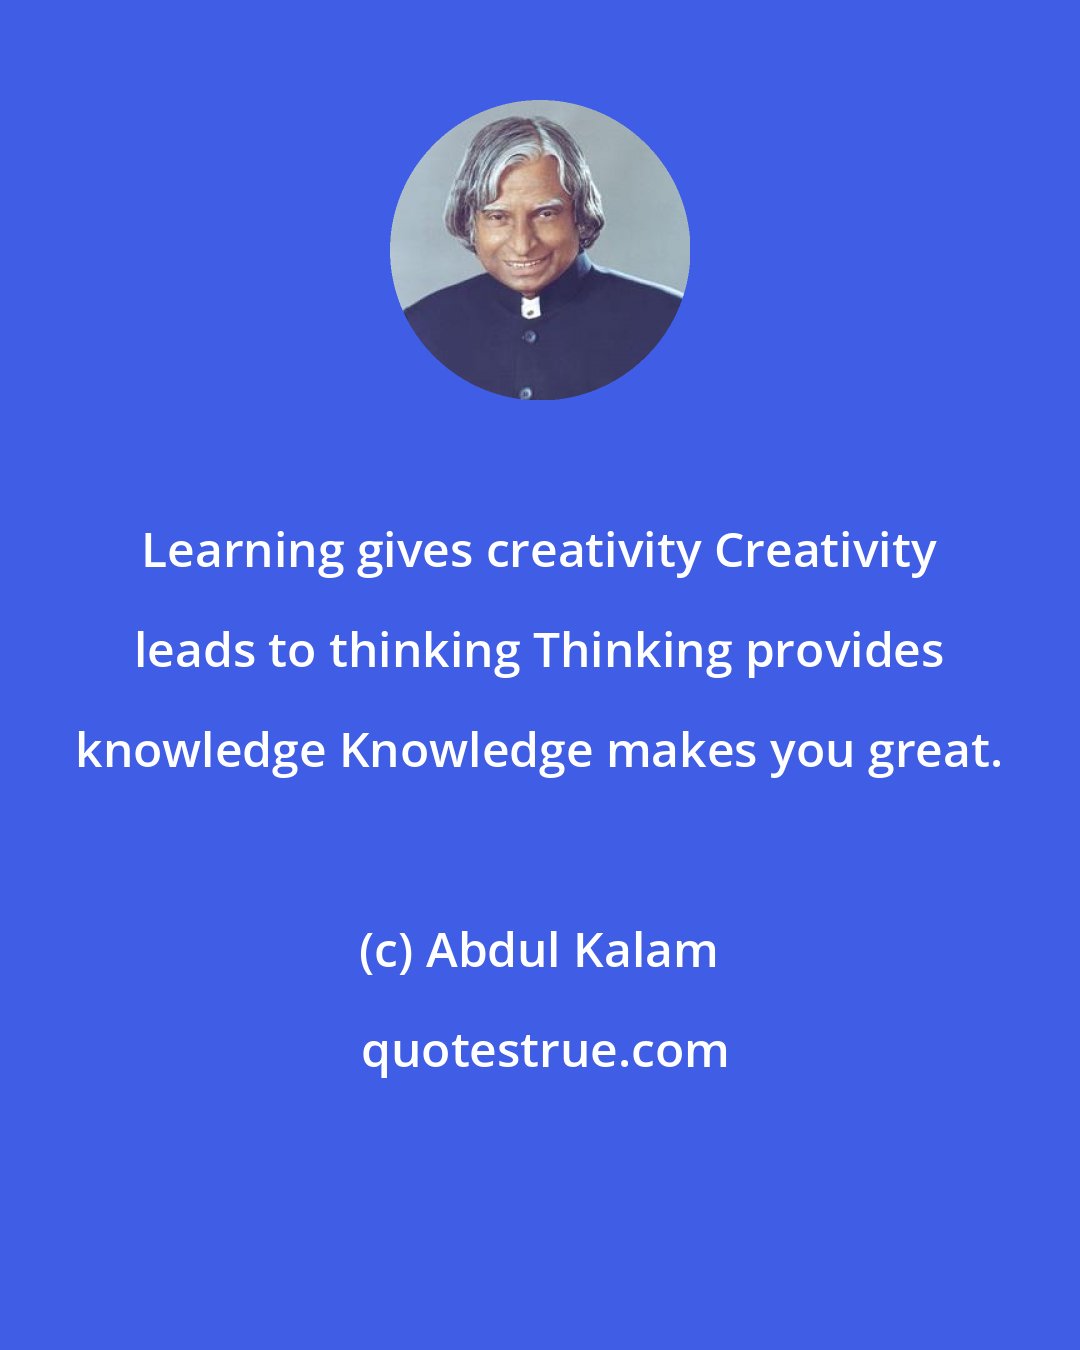 Abdul Kalam: Learning gives creativity Creativity leads to thinking Thinking provides knowledge Knowledge makes you great.